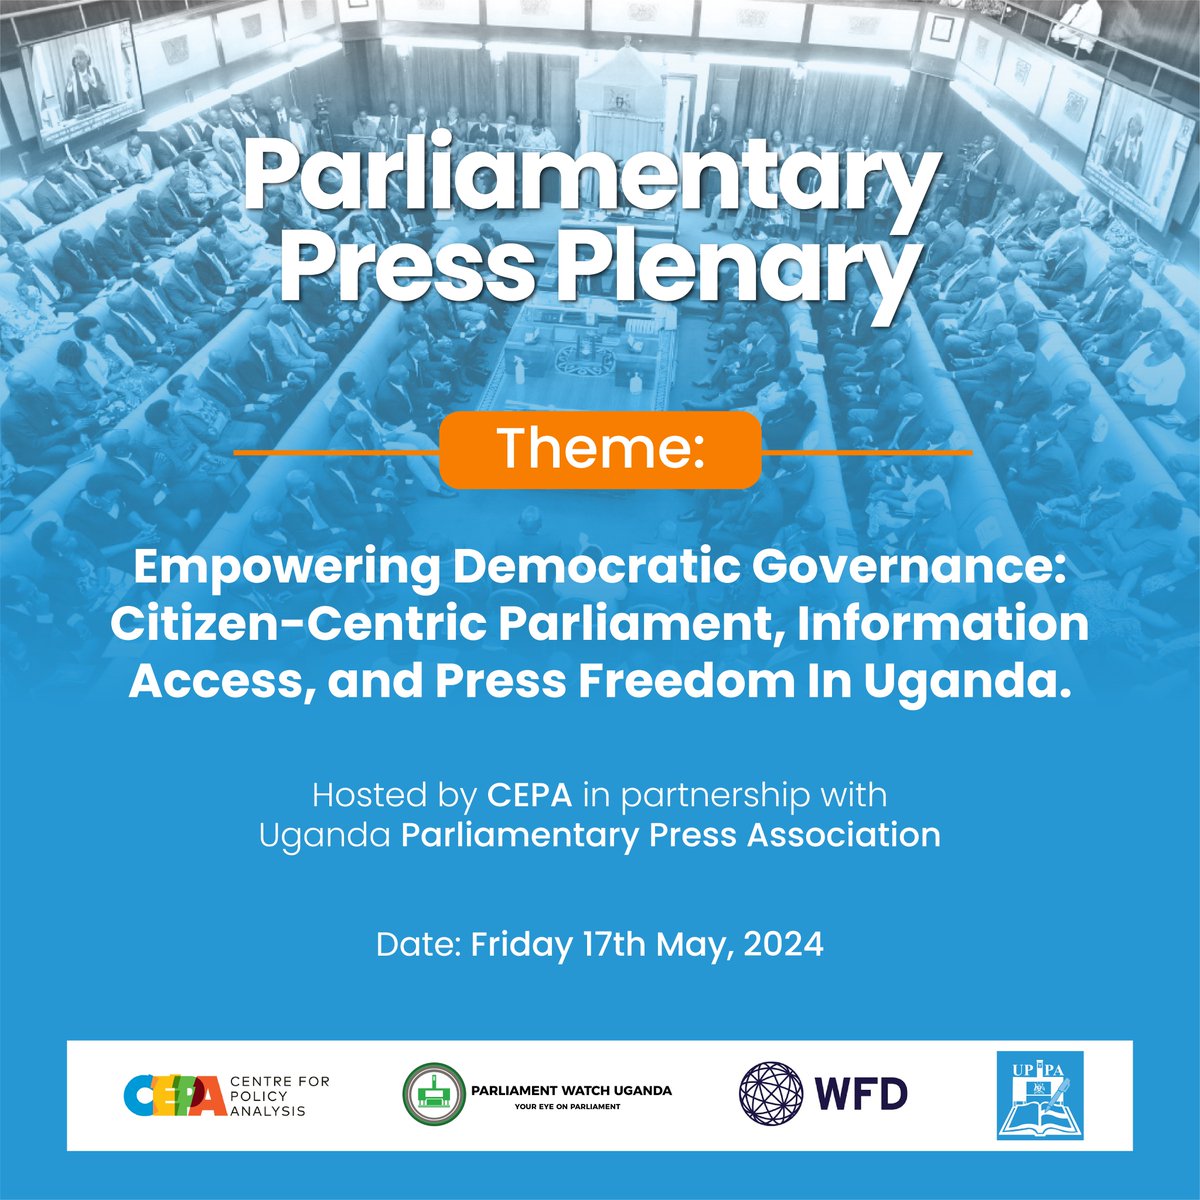 #HappeningNow The Parliament Press Plenary is currently taking place with more than 50 journalists from the Uganda Parliamentary Press Association (@Uppareports), discussing the empowerment of Democratic Governance through the pursuit of a citizen-centric Parliament, Information